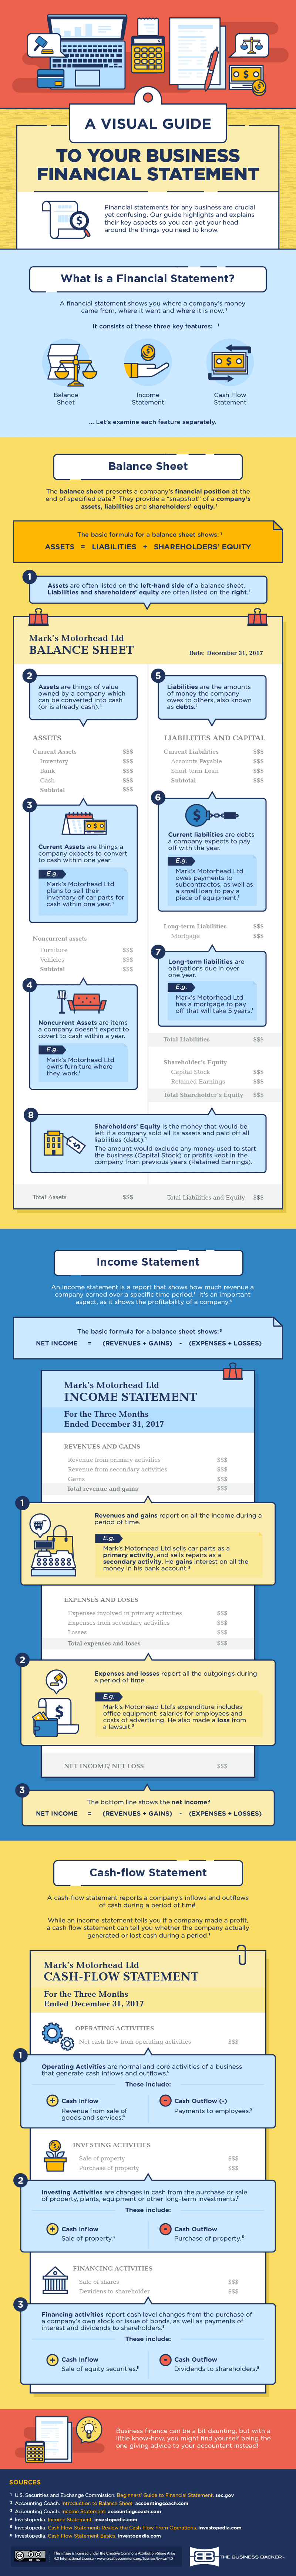 Infographic: A Visual Guide to Understanding Your Financial Statement